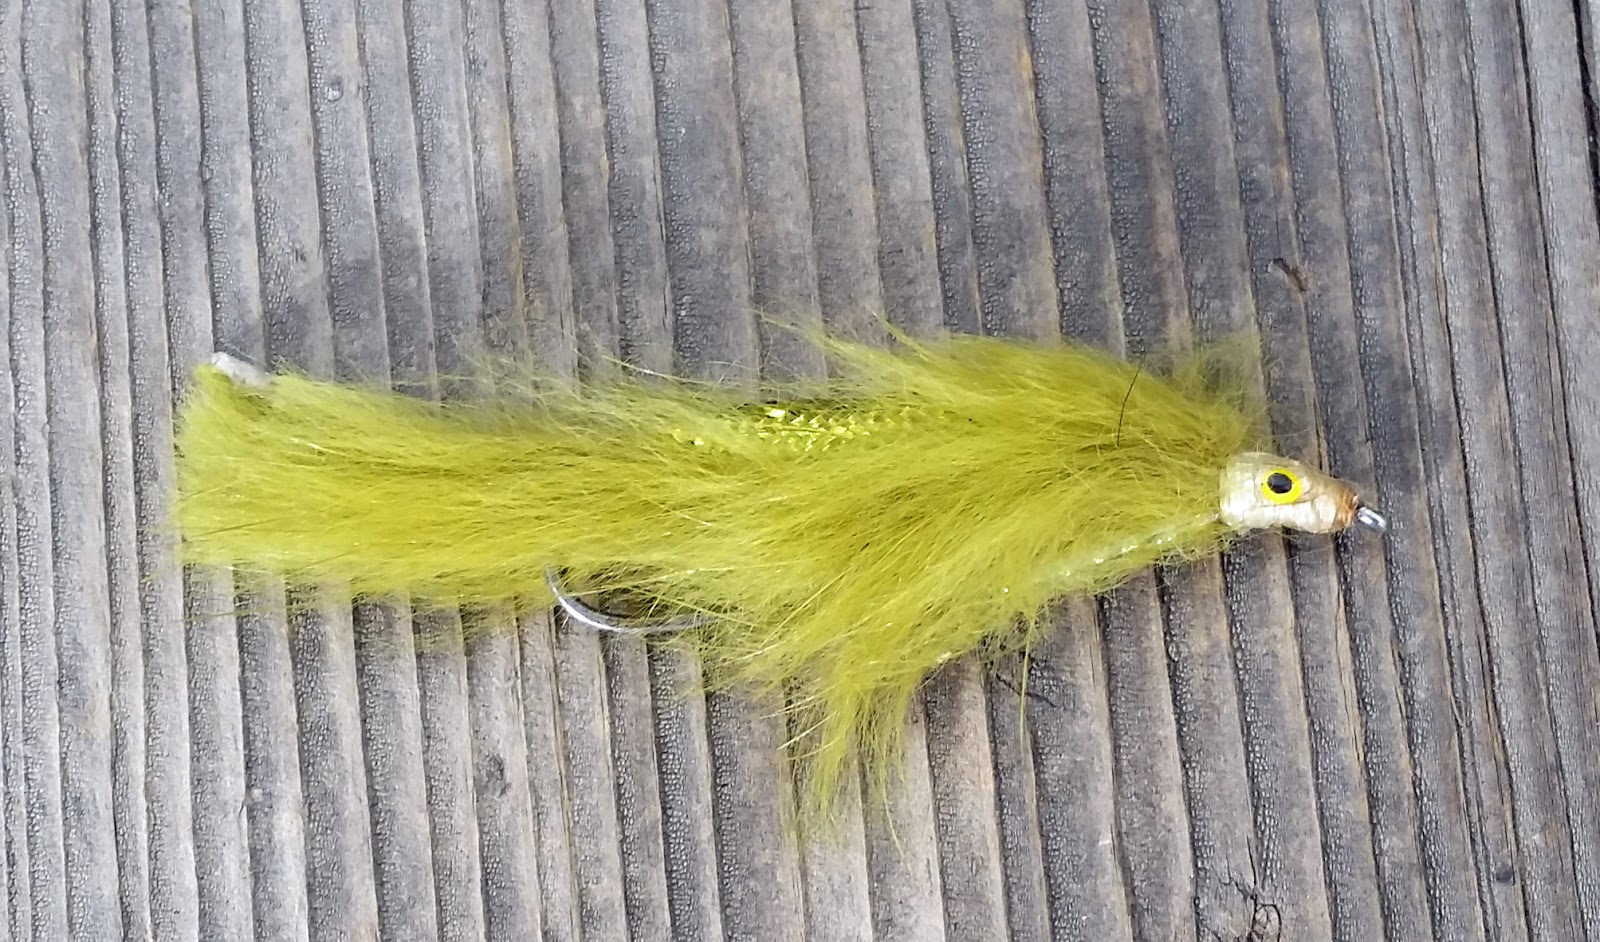 Jon Baiocchi Fly Fishing News: Streamer Candy For Big Trout